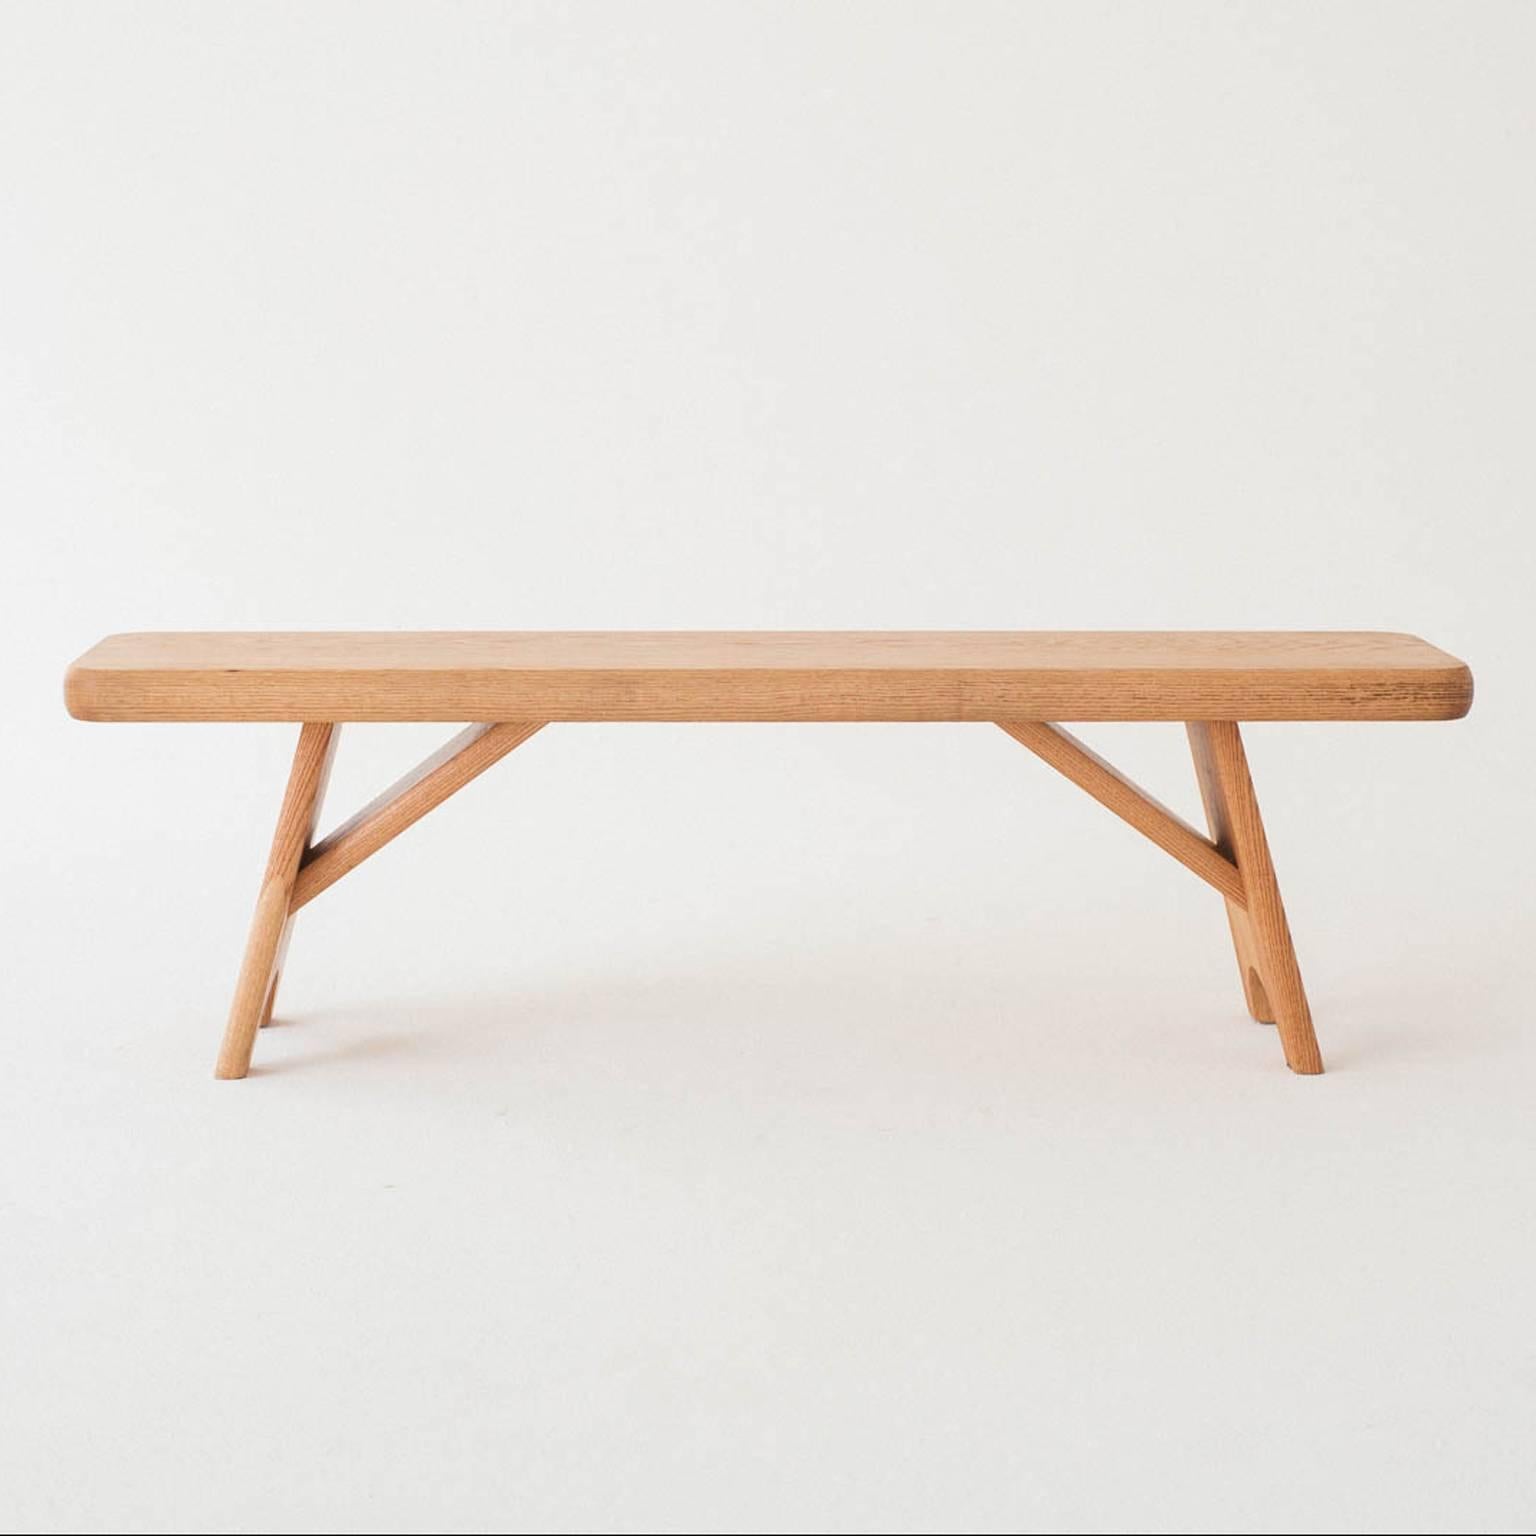 A sturdy and balanced bench that completes any room. Echoing the lines of a simple Shaker bench in minimalism and simplicity the Merton bench, like its namesake, holds a decidedly simple and refined presence. Angled legs provide poise and stability.